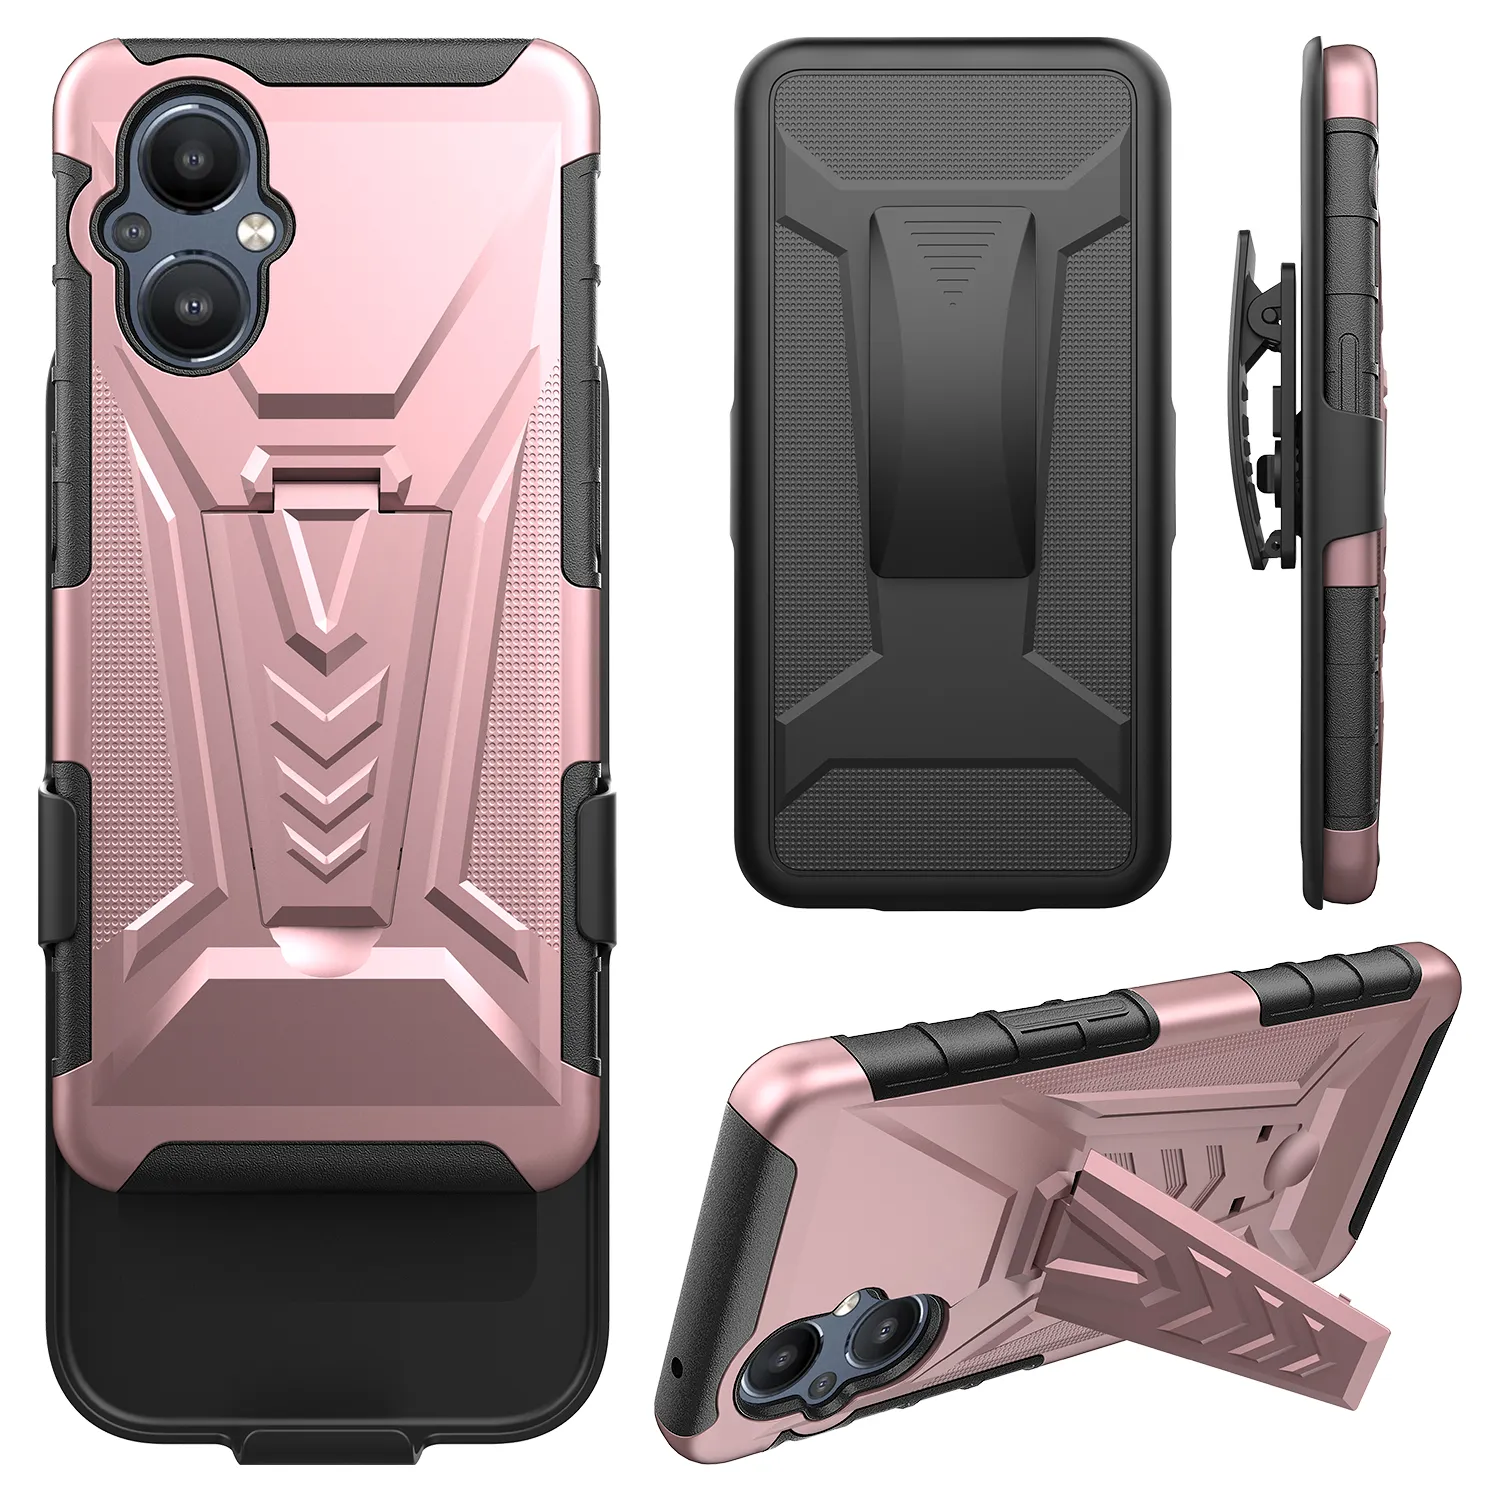 Kvalitet 3 i 1 Hybrid Holster -fodral för Coolpad Suva Blu G91 Boost Celero OPP A96 One Plus N20 TCL 30SE Dual Layer Cover